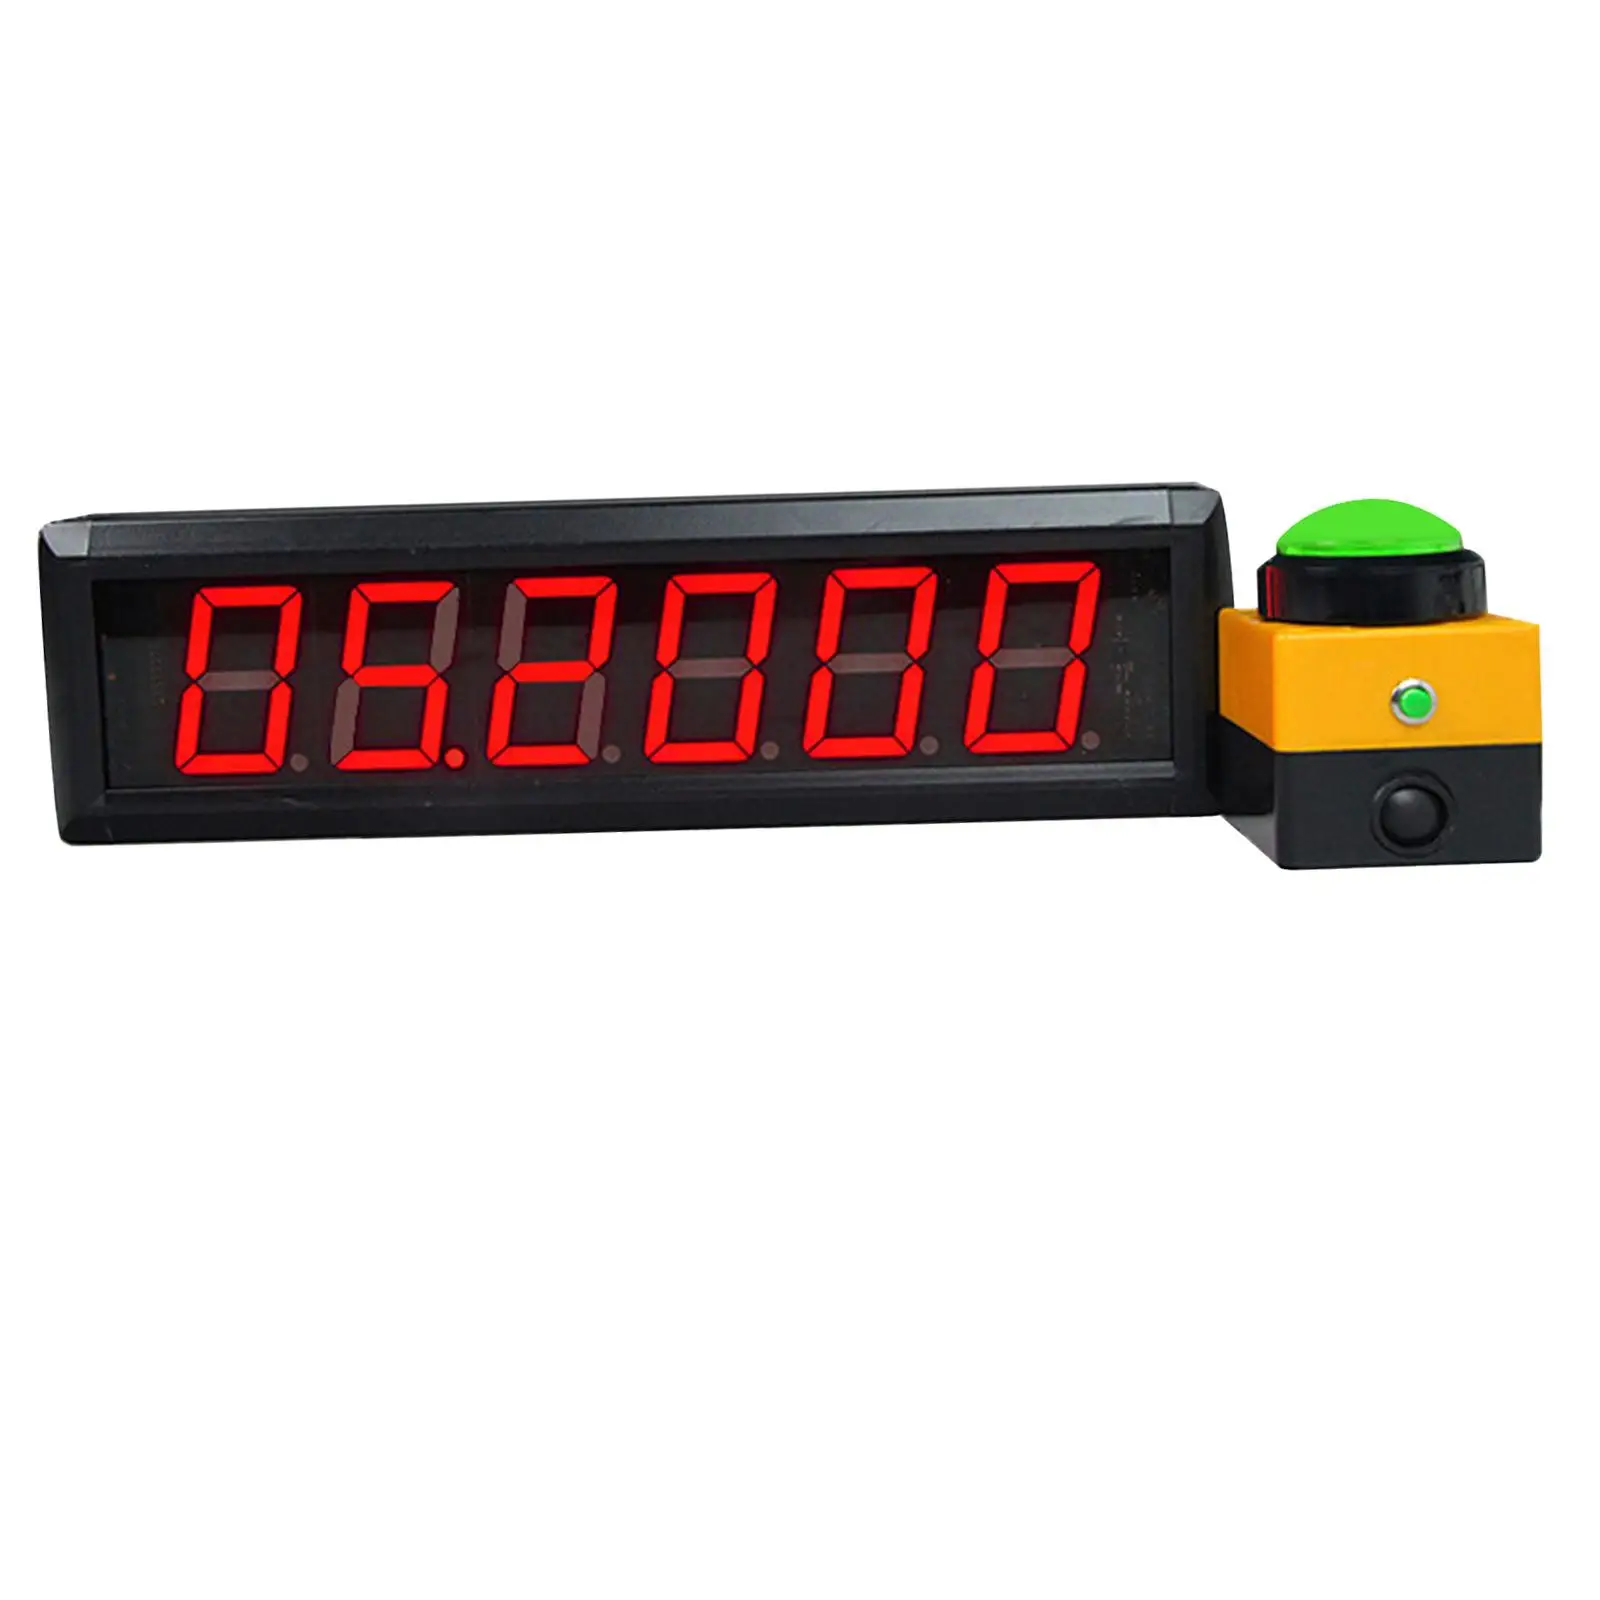 Digital Electronic Timer Popular for Promotional Activities Exercise Sports